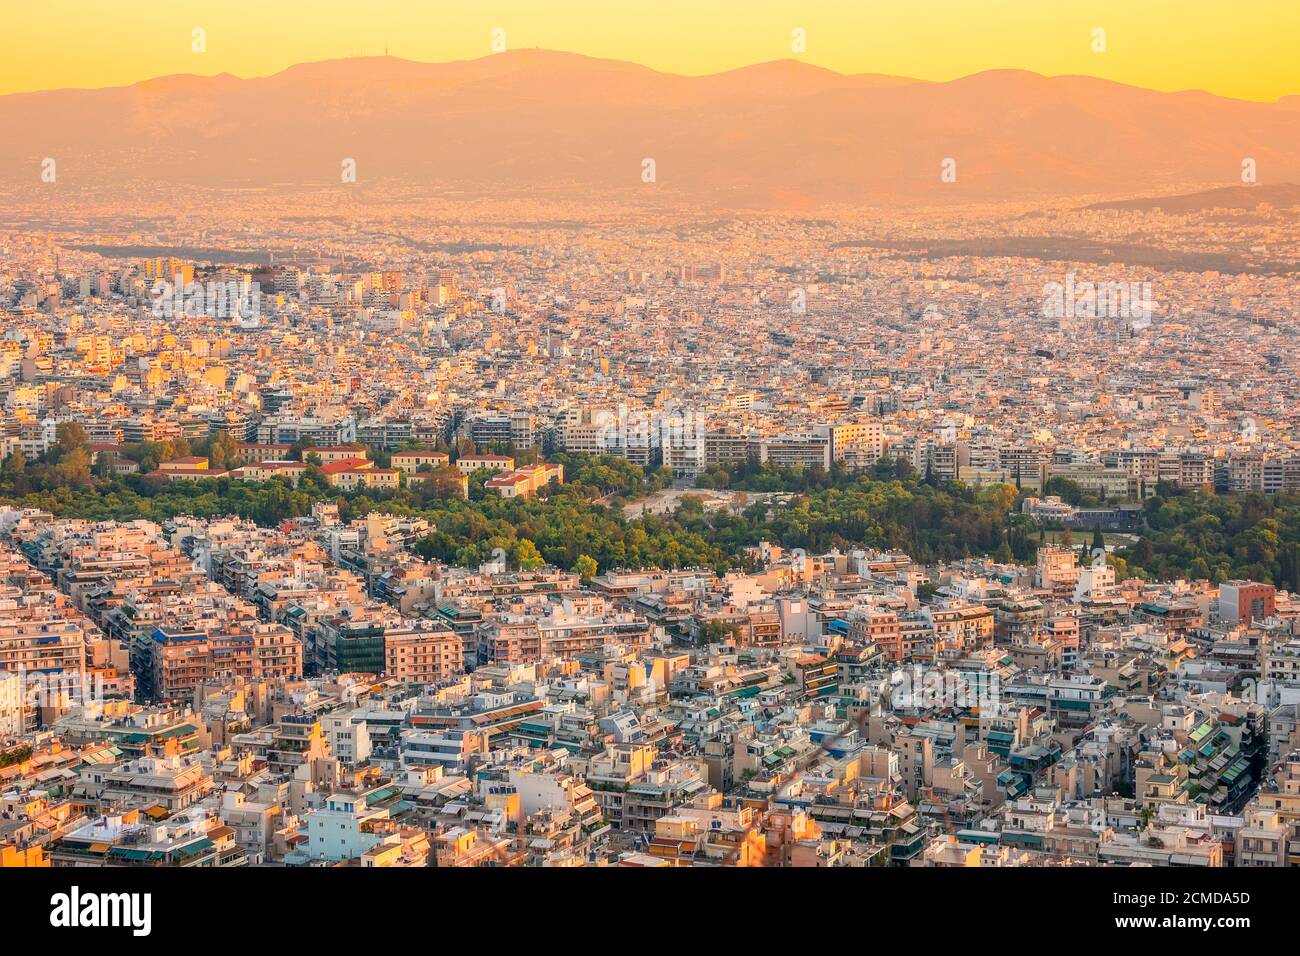 Greece. Warm summer evening over the rooftops of Athens. Residential and office buildings and narrow streets. Green parks. Aerial view Stock Photo